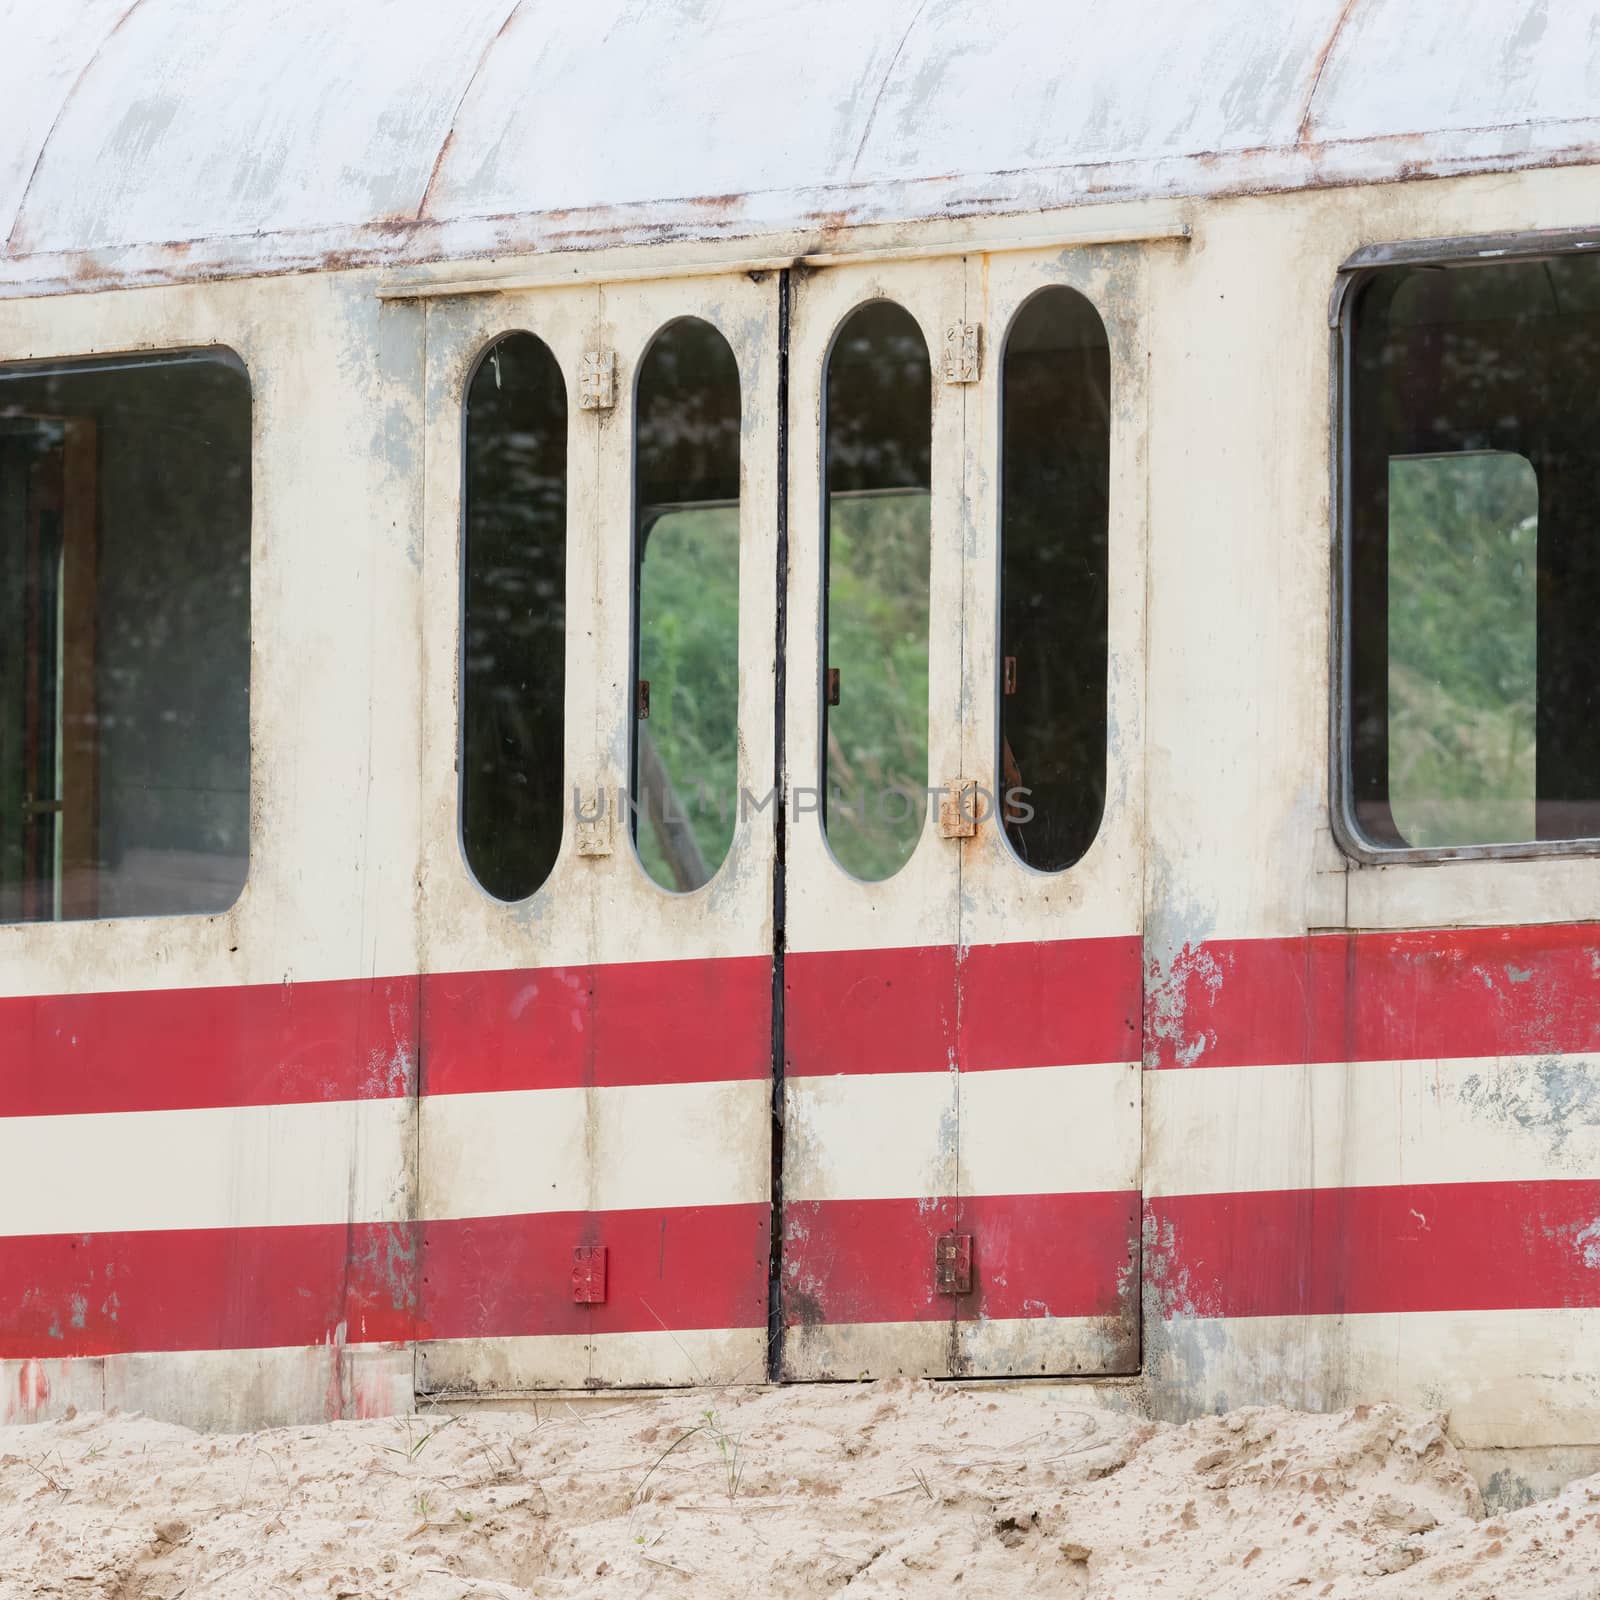 Old train carriage by michaklootwijk